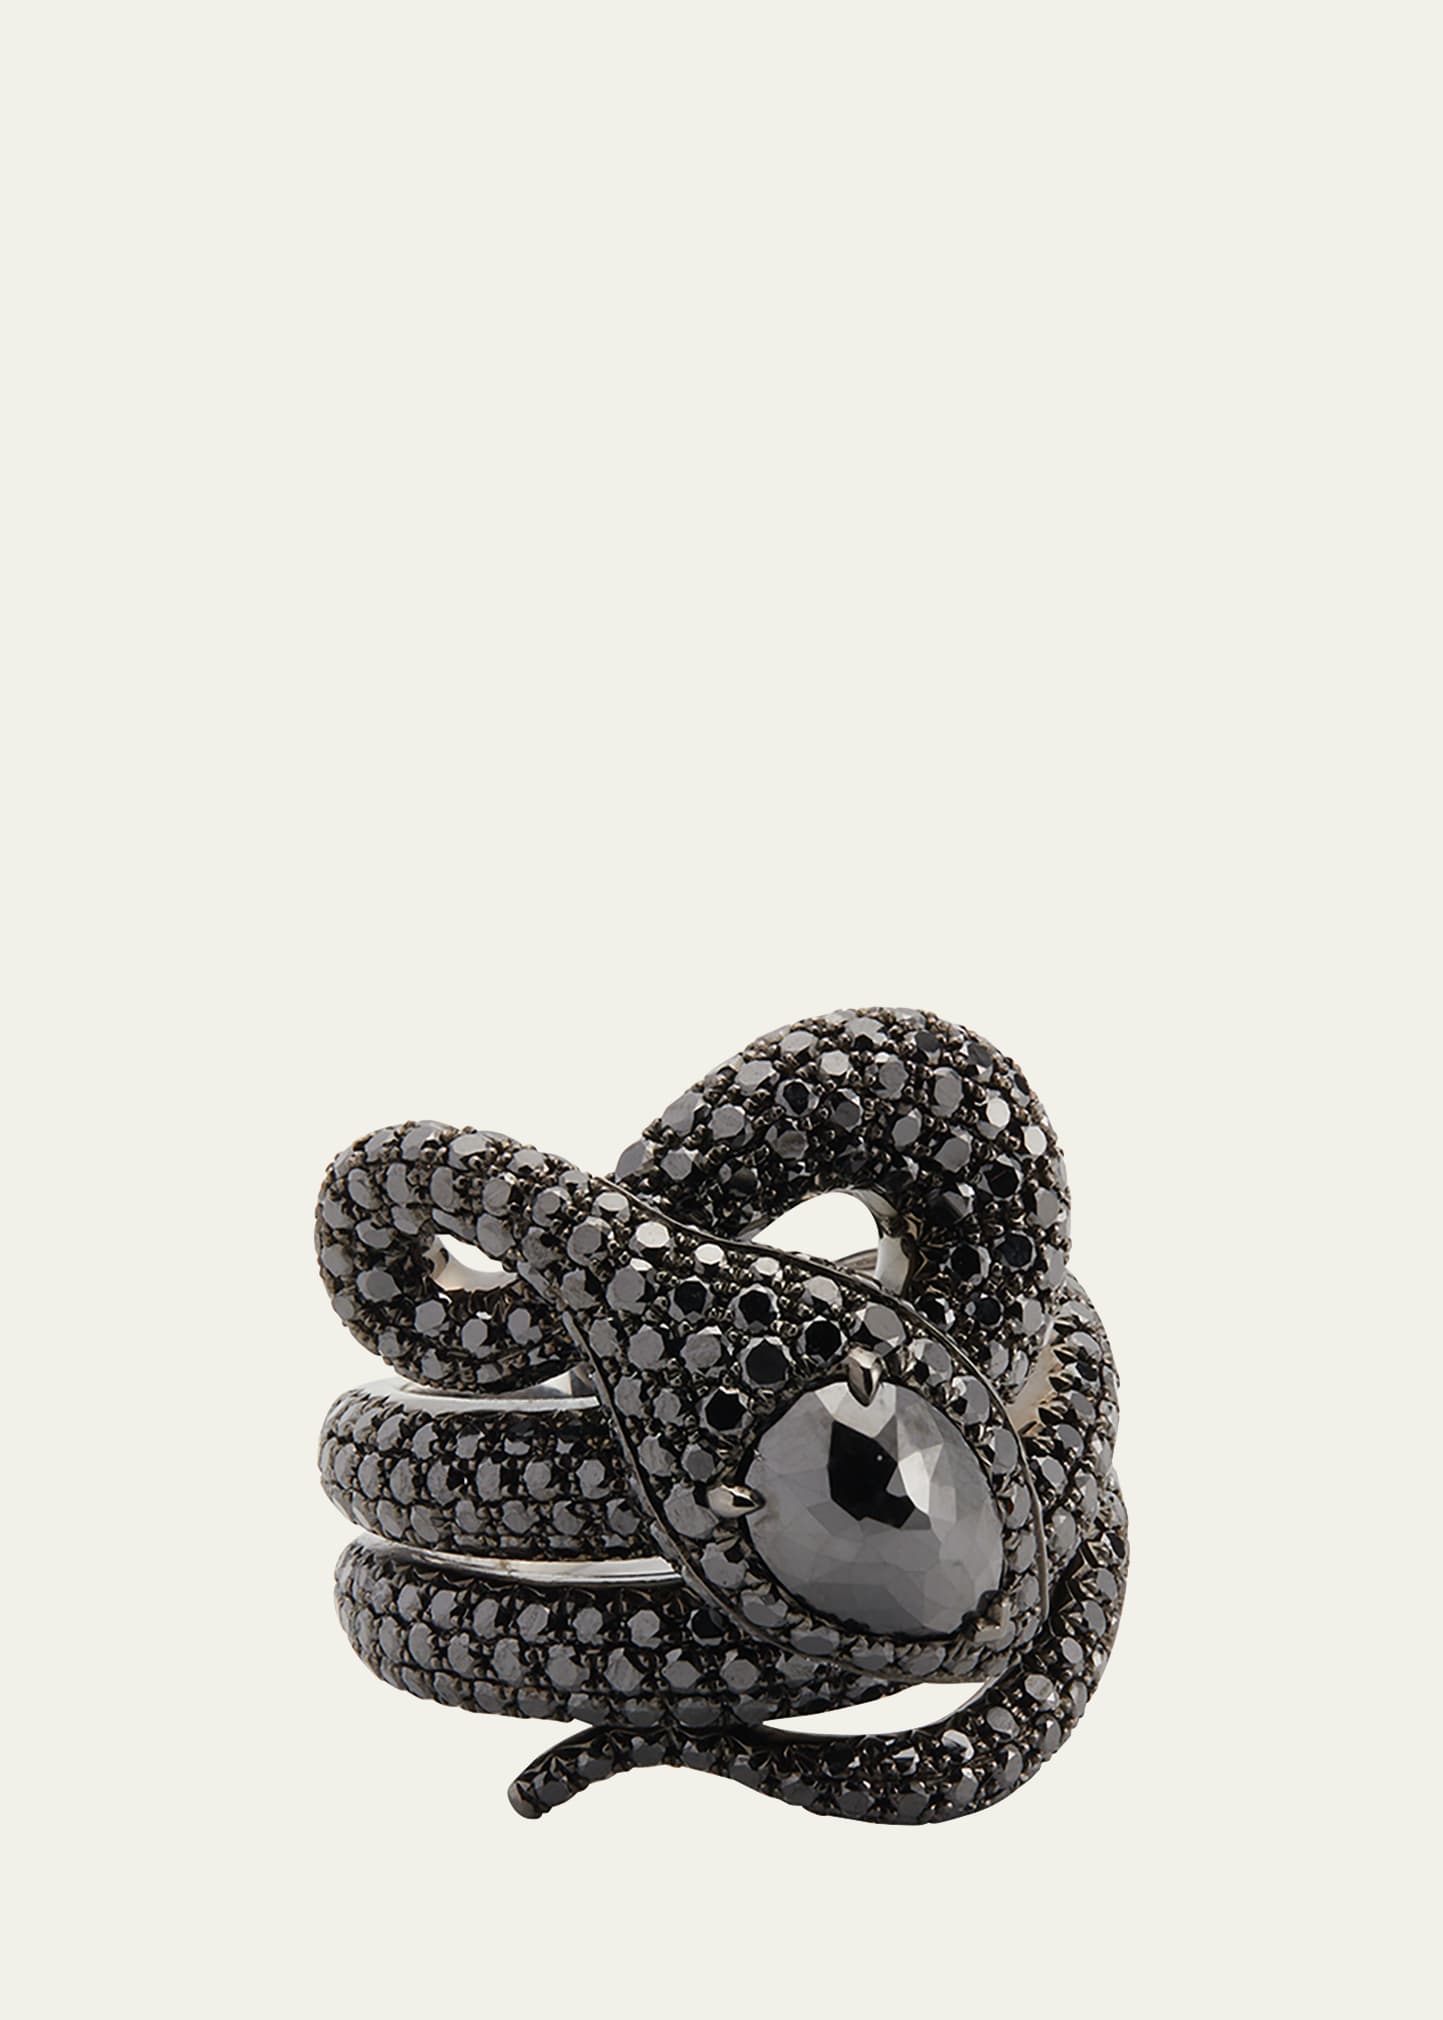 White Gold Black Diamond Ring with Black Diamond Head from The Snake Collection, Size 7